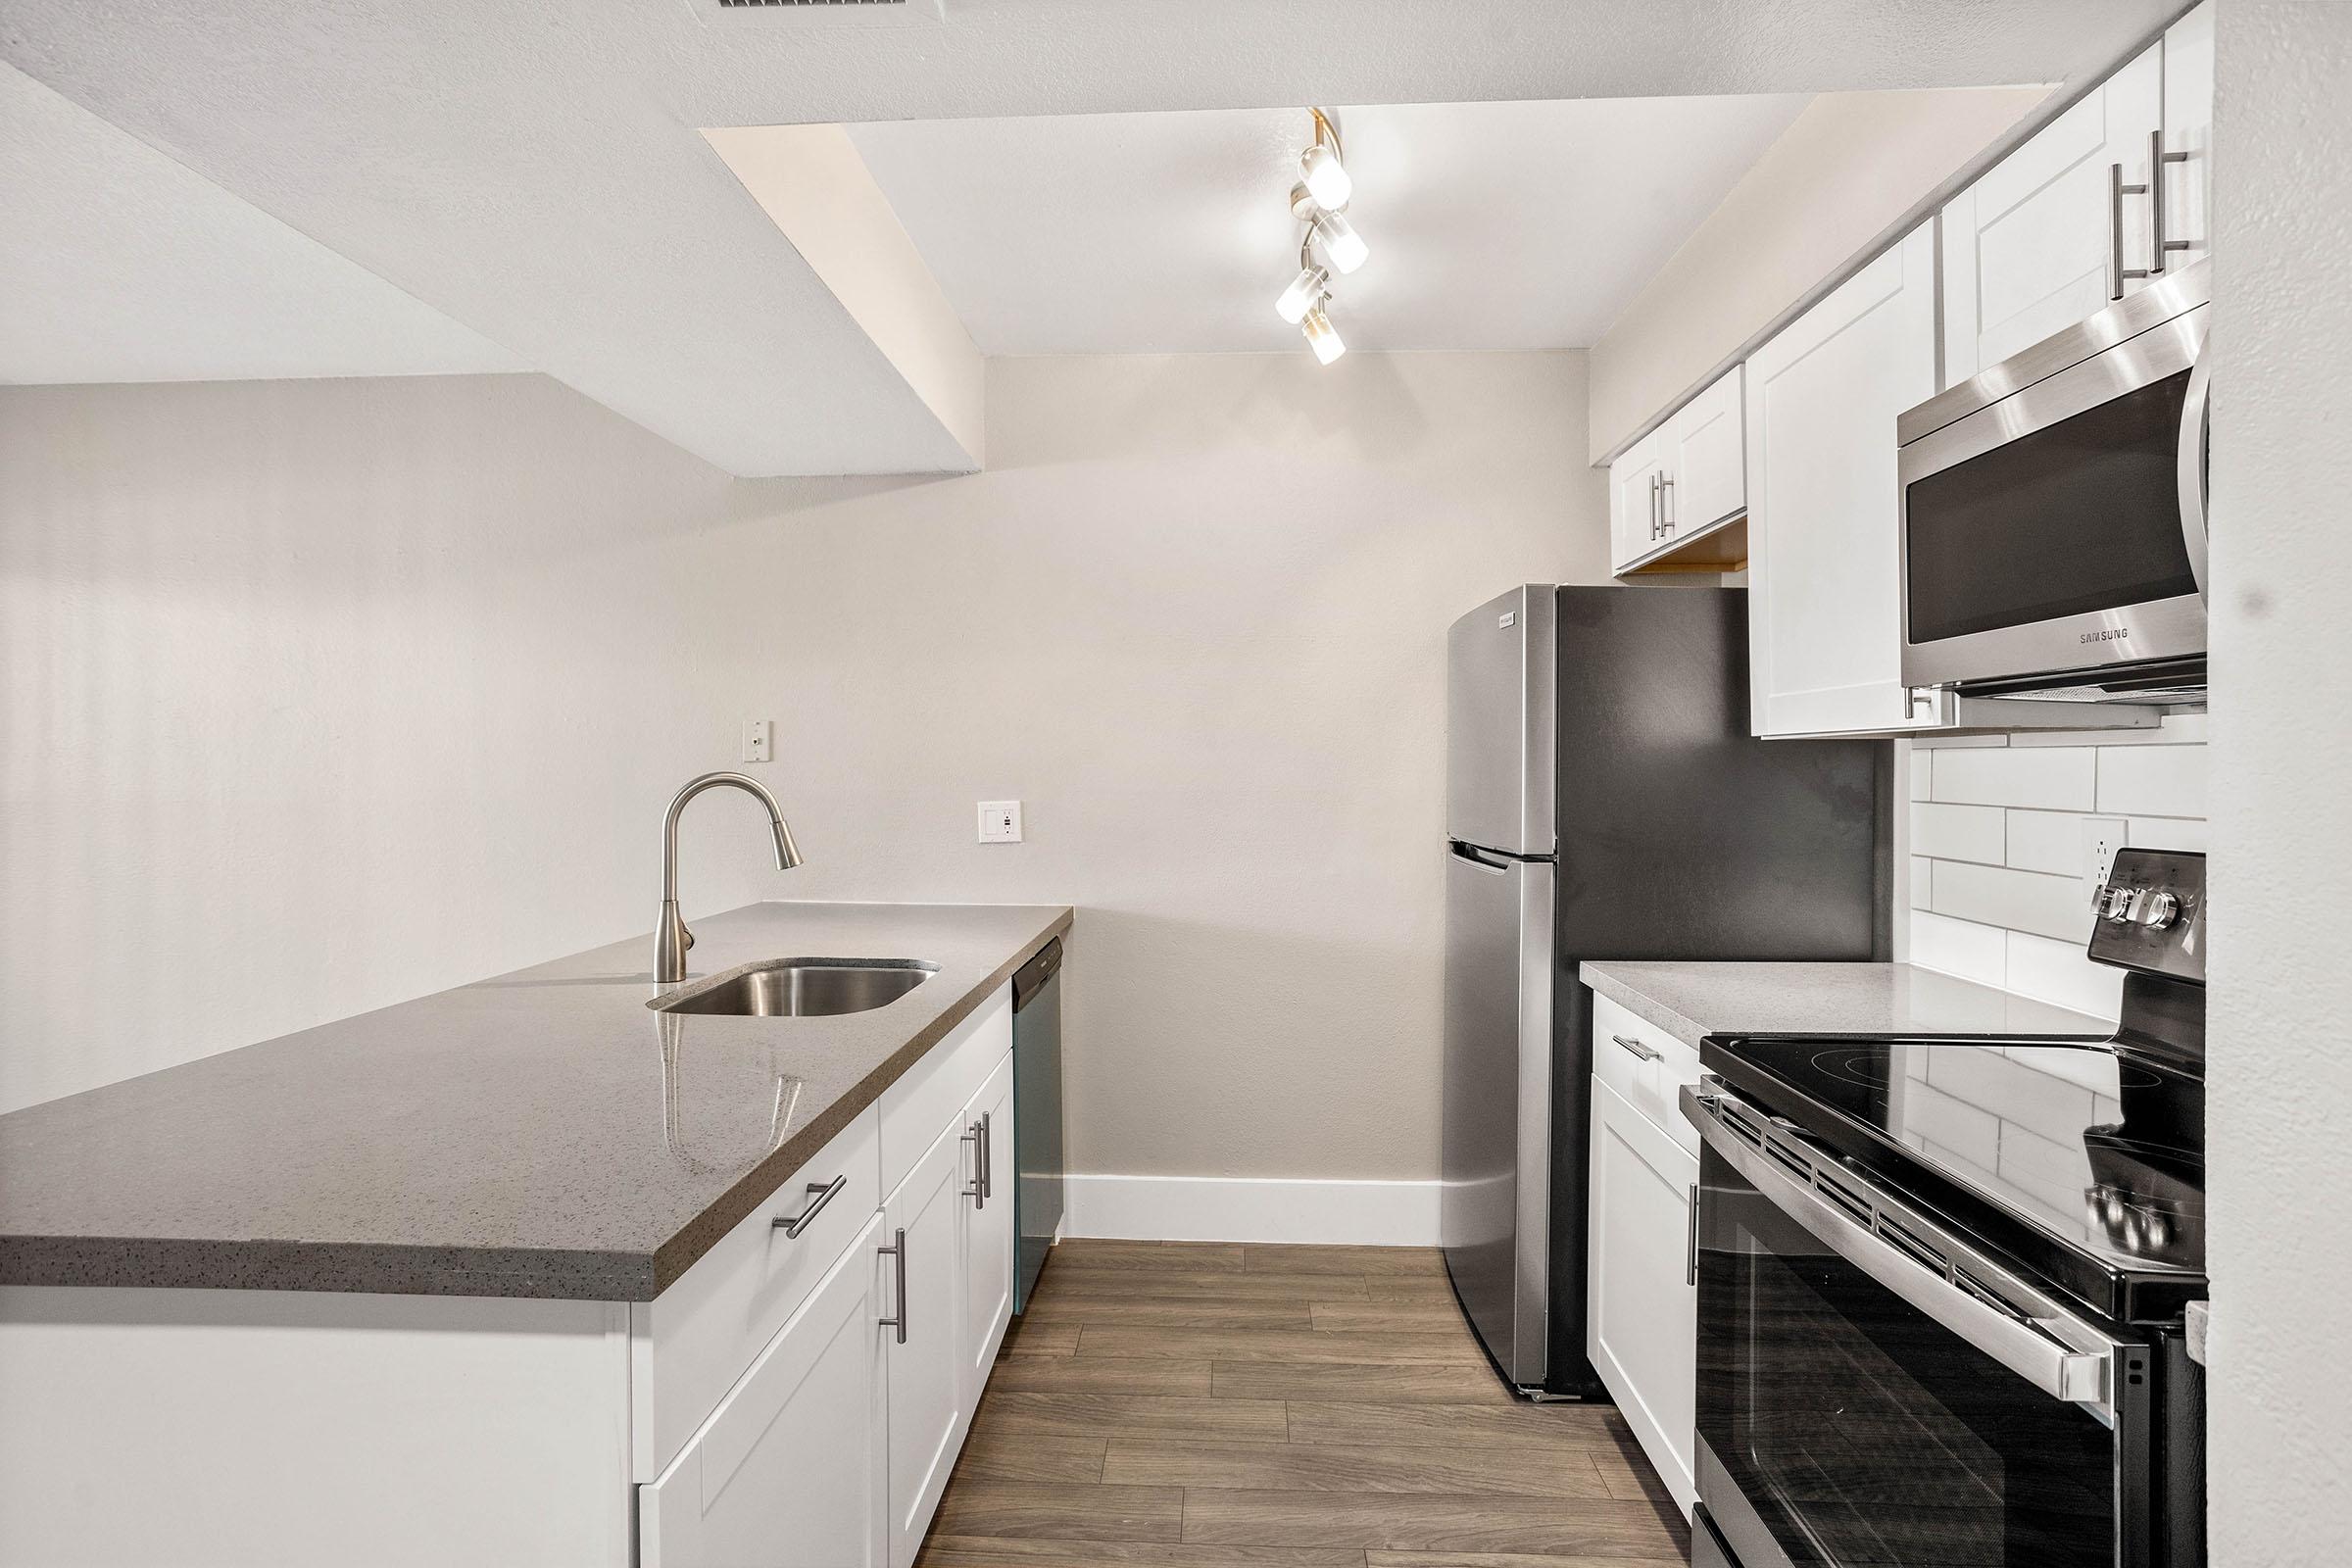 Renovated kitchen with white cabinets, grey counter tops, and stainless steel appliances